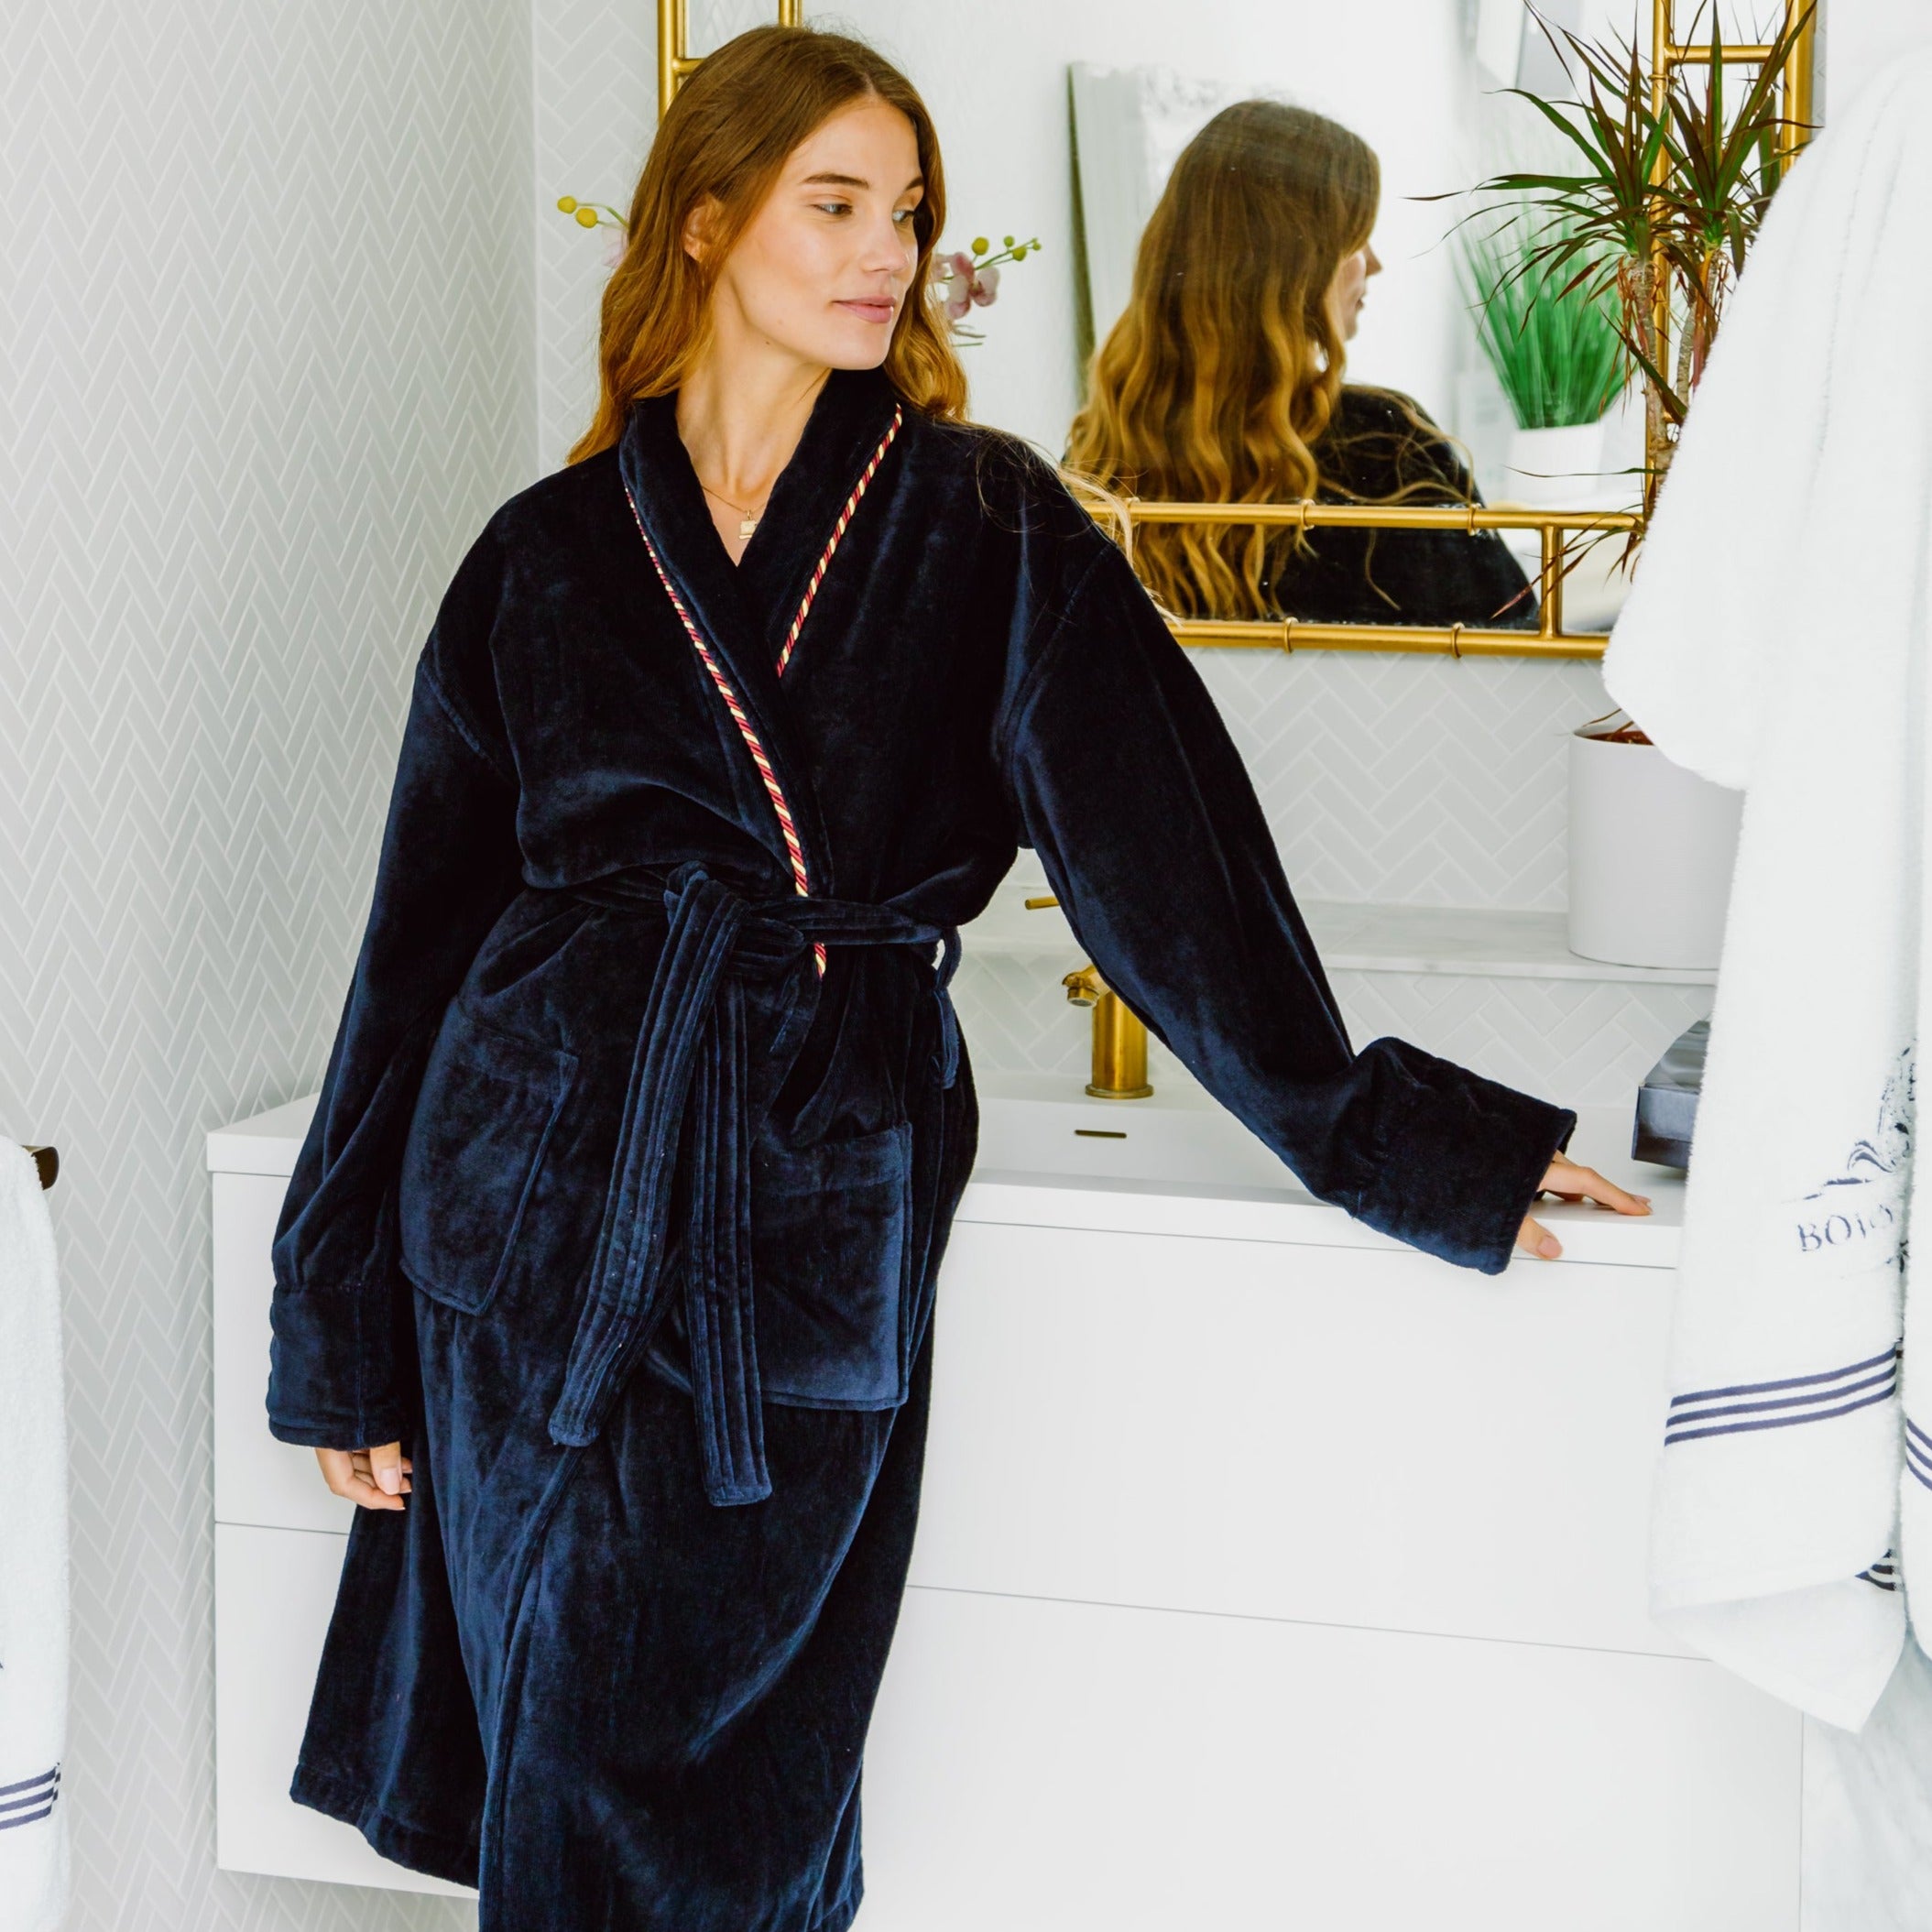 Creating my way to Success: How to make a dressing gown or bath robe